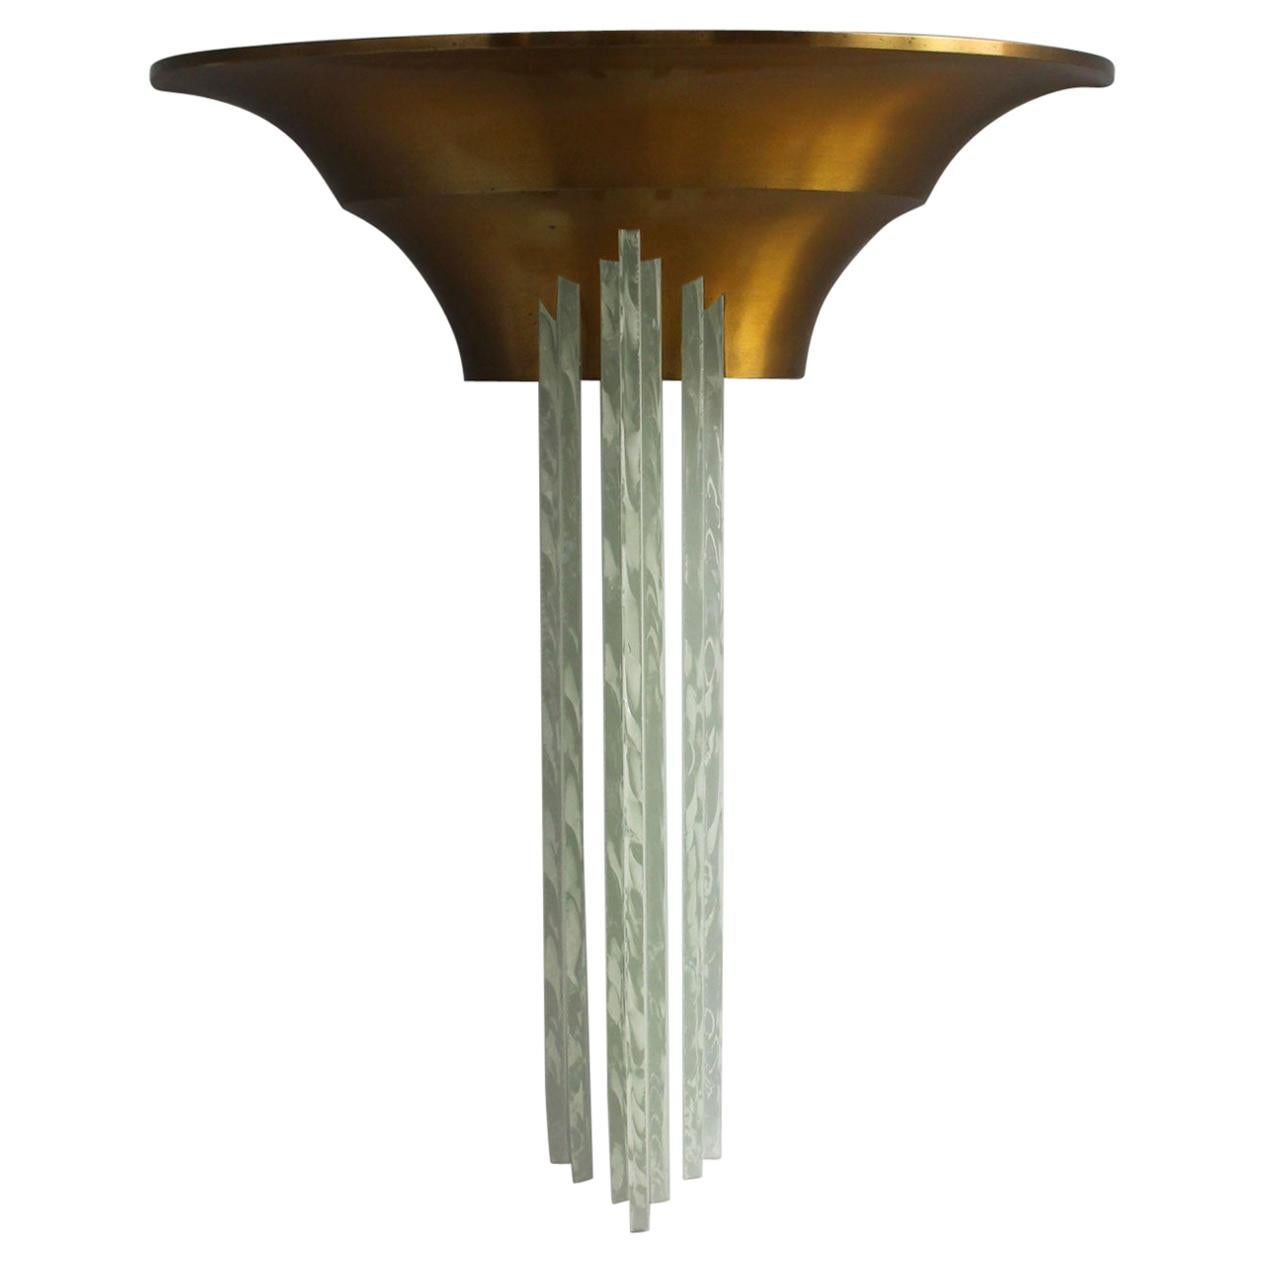 Large Fine French Art Deco Bronze Sconce with Cascading Glass Slabs by Perzel